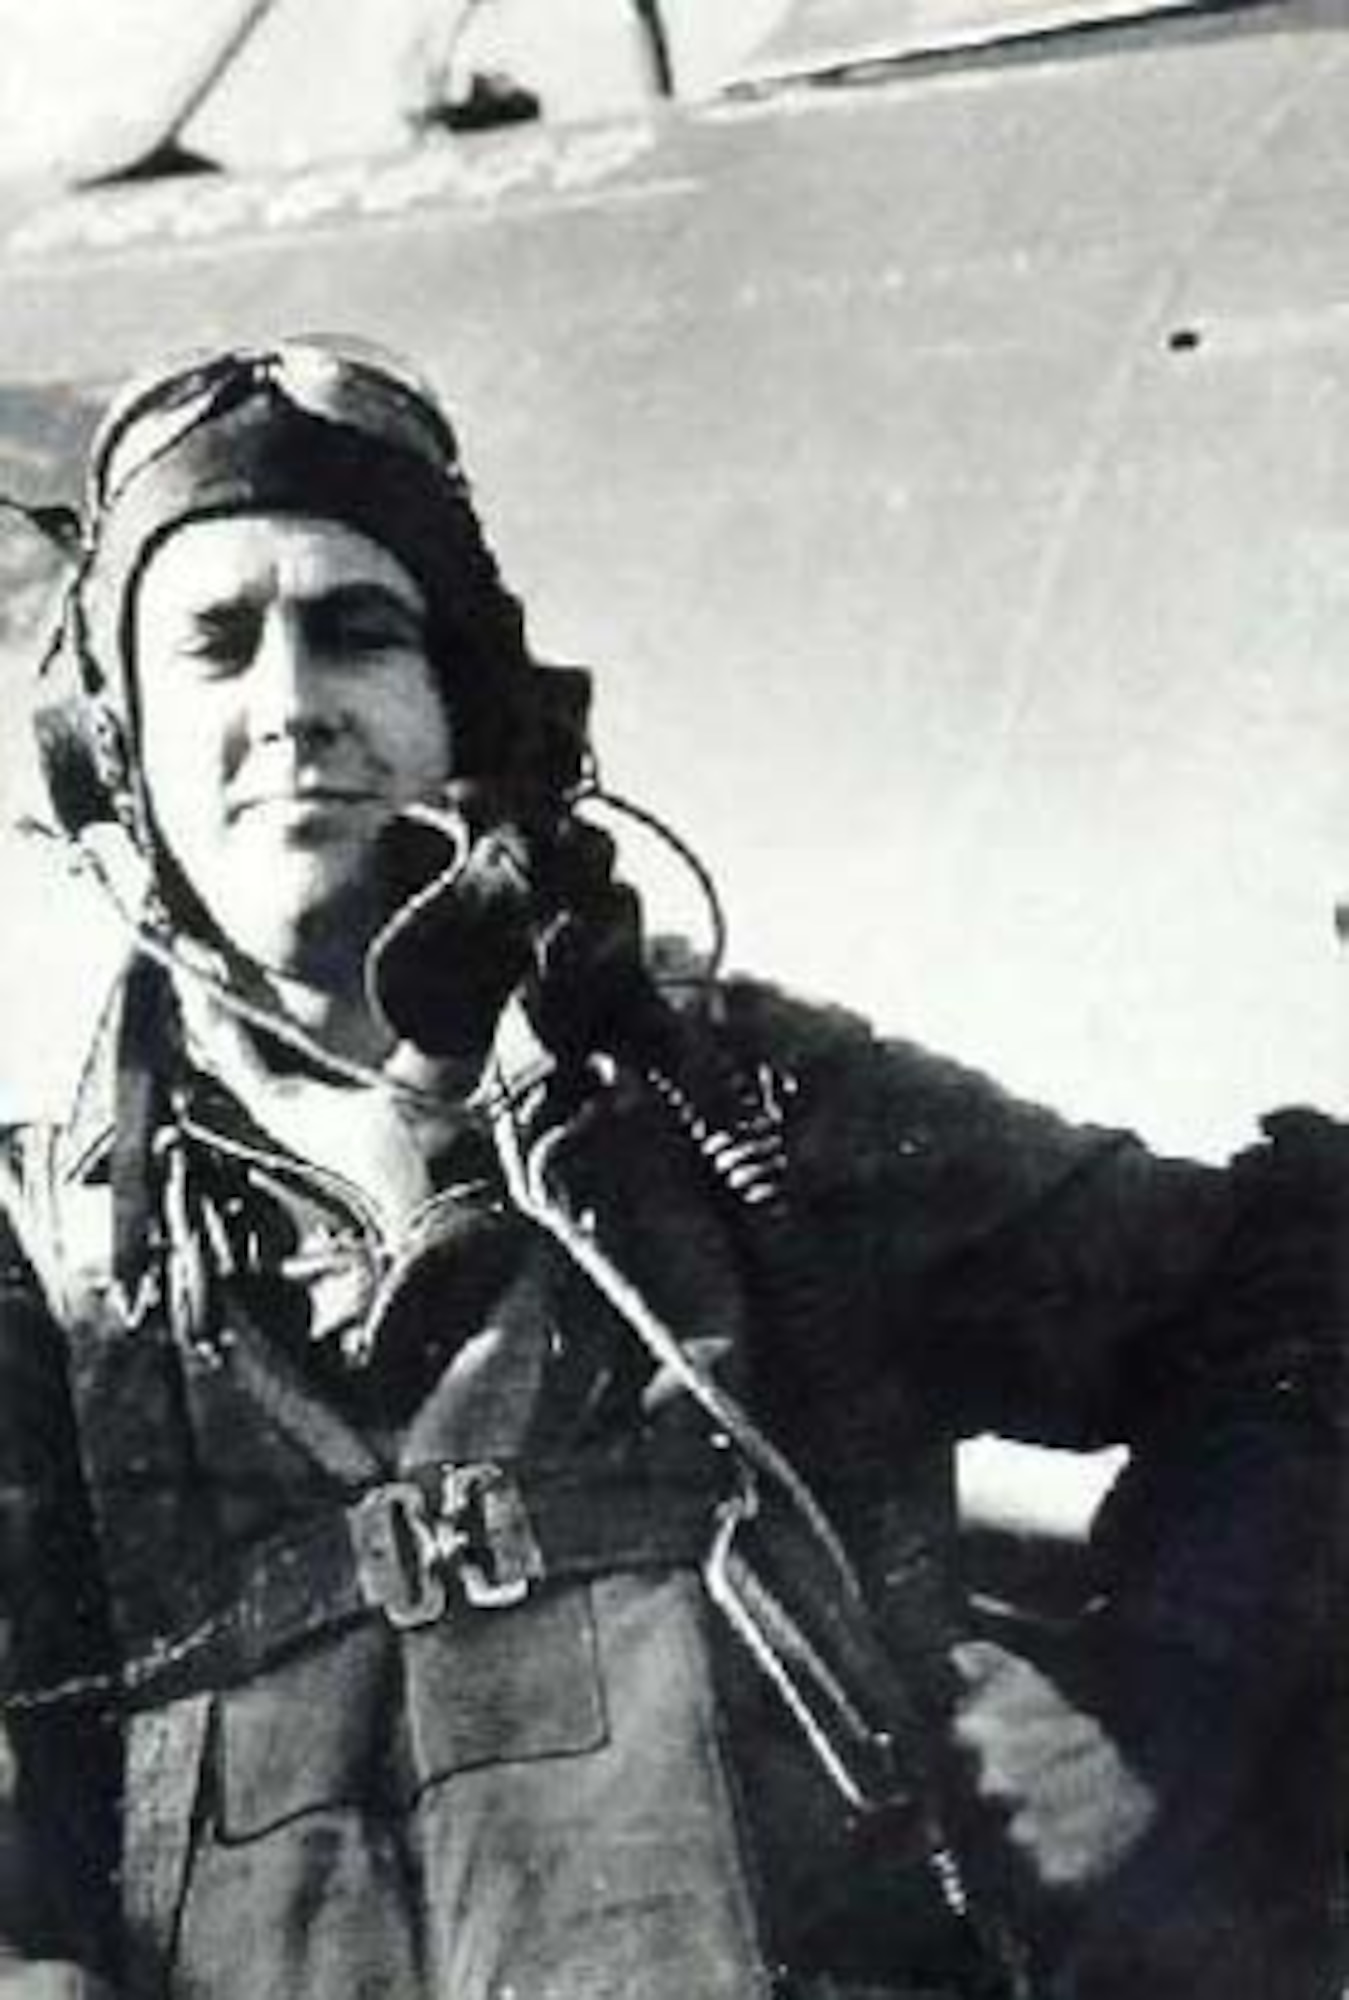 Col. David C. Schilling is seen in this 1950 photo. Schilling, a World War II ace in the European campaign, was the commander of the 56th Fighter Group at Selfridge Air Force Base in the late 1940s. In 1948, he developed the plan for and led the first transatlantic flight of U.S. Air Force fighter aircraft, taking off from Selfridge. (U.S. Air Force photo)